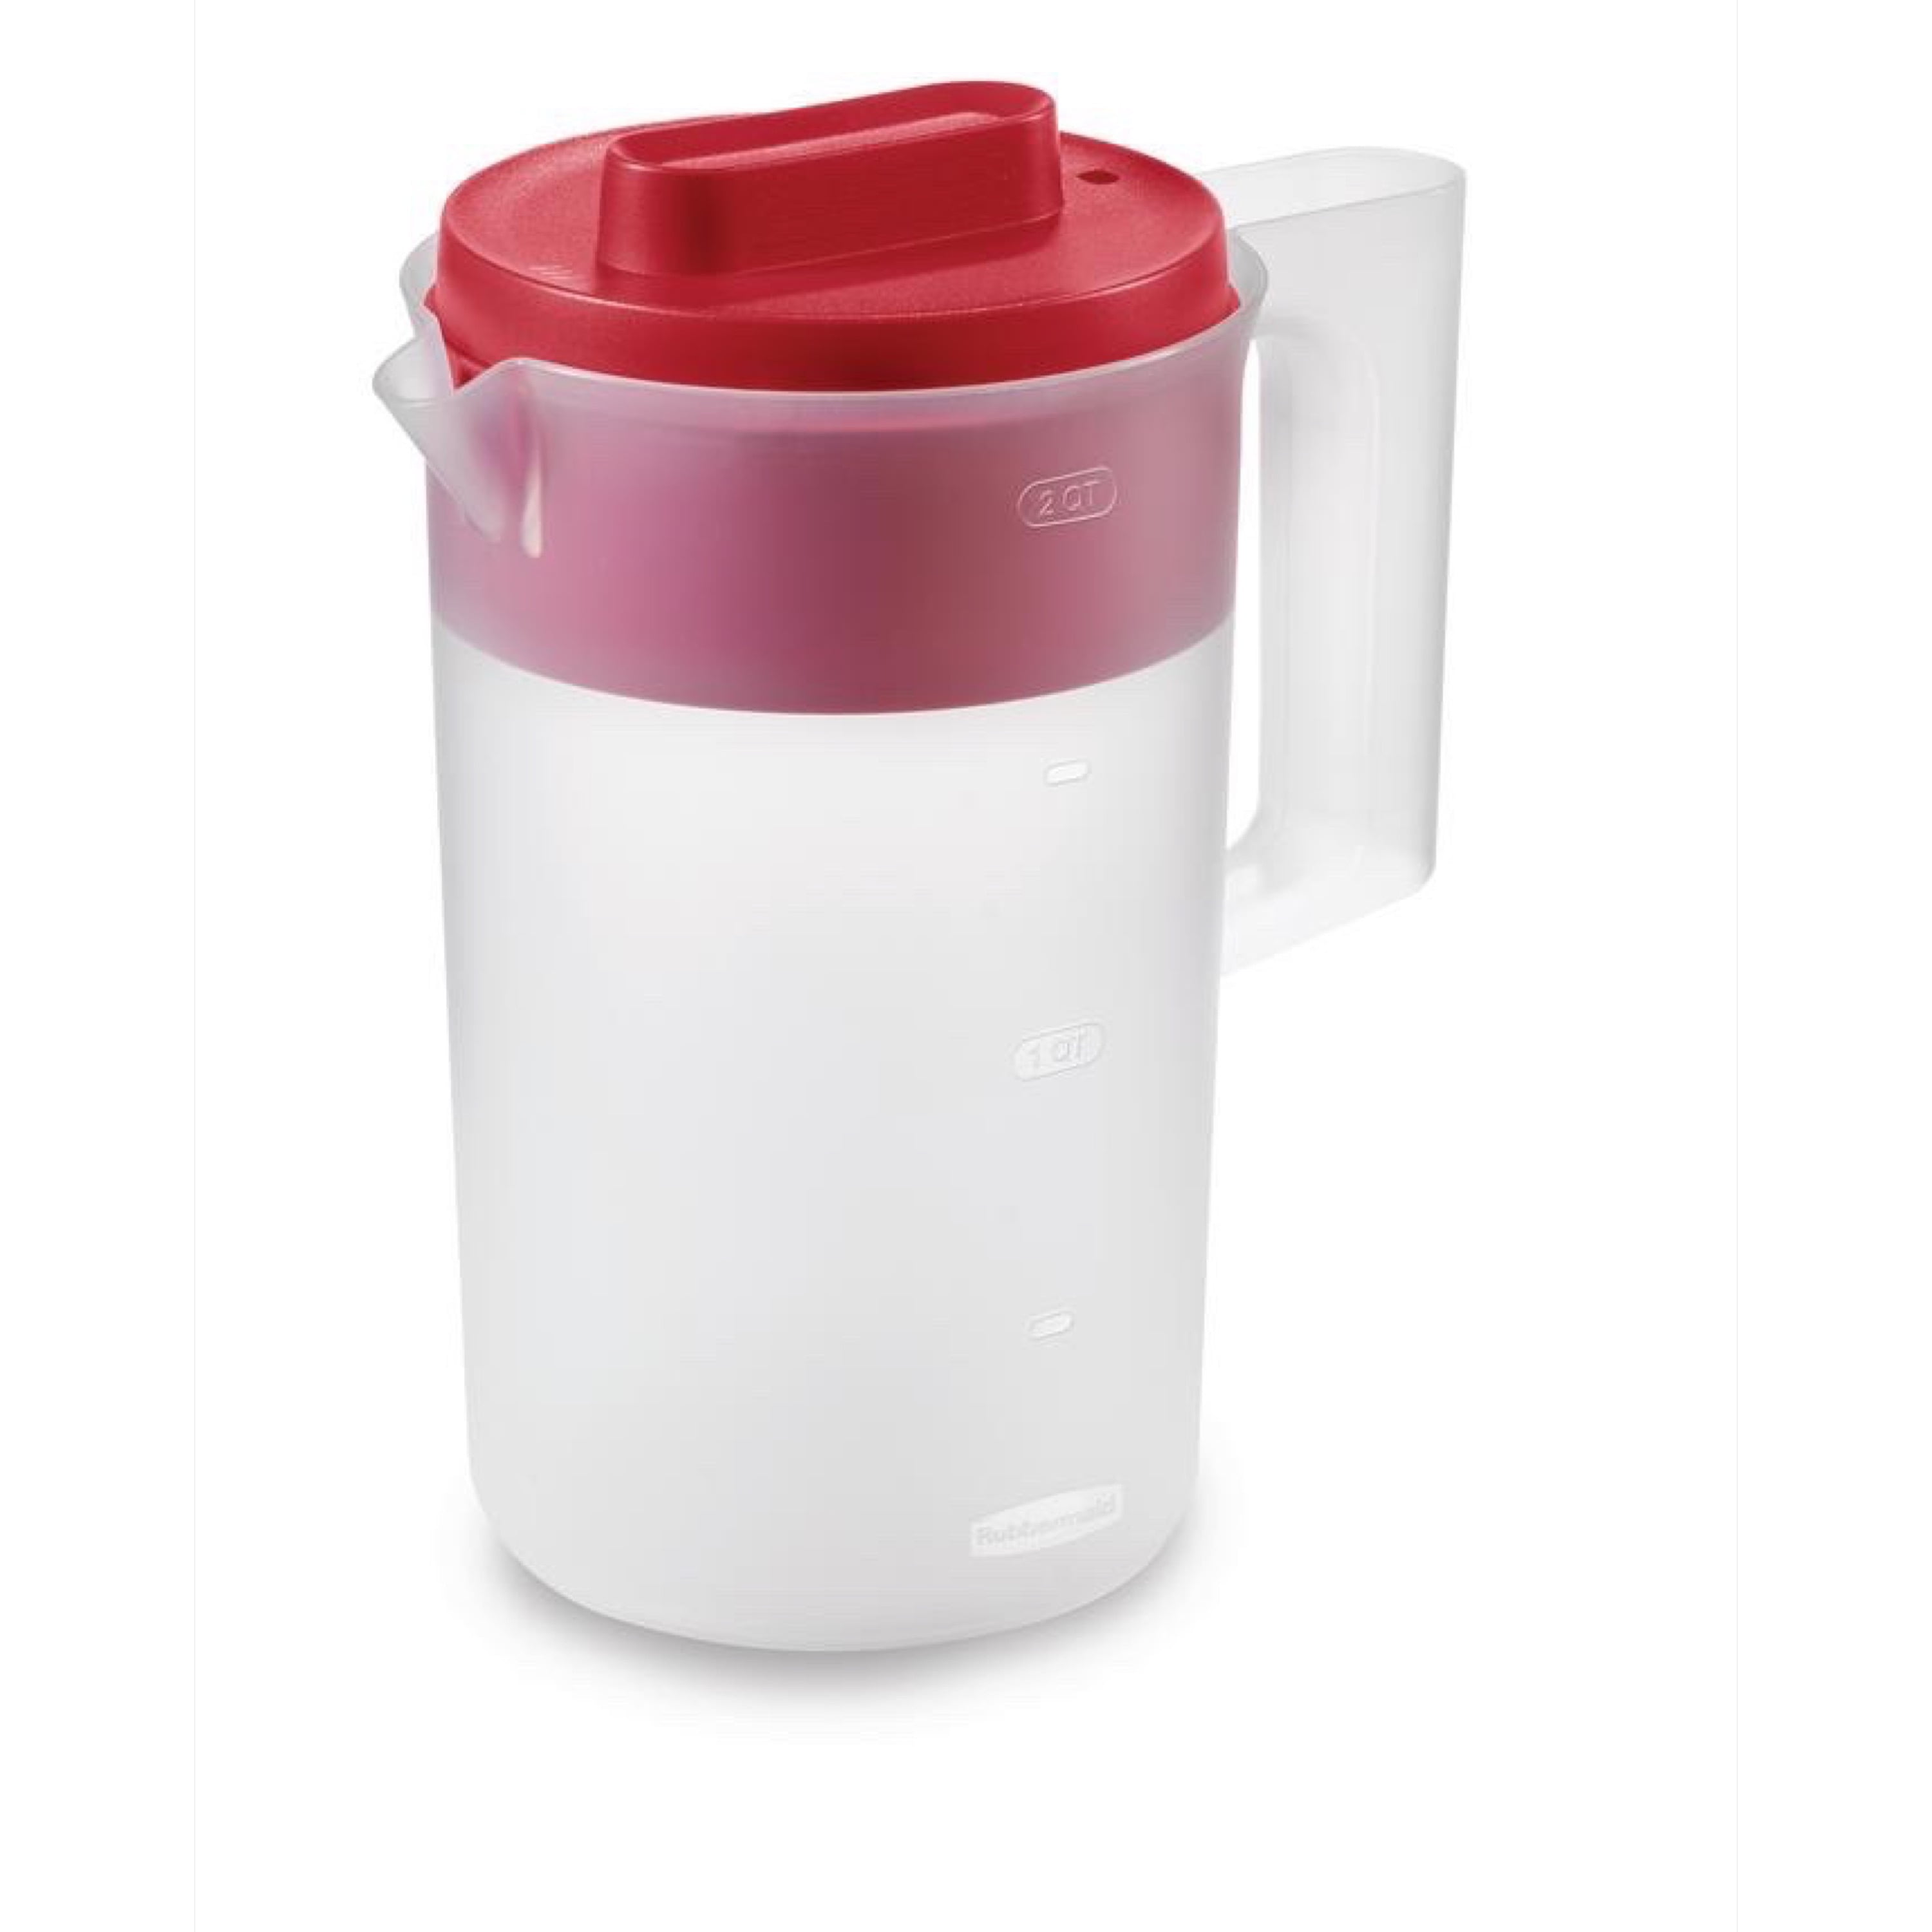 Half Gallon Commercial Rubbermaid Pitcher [up to 212 F] for Brew